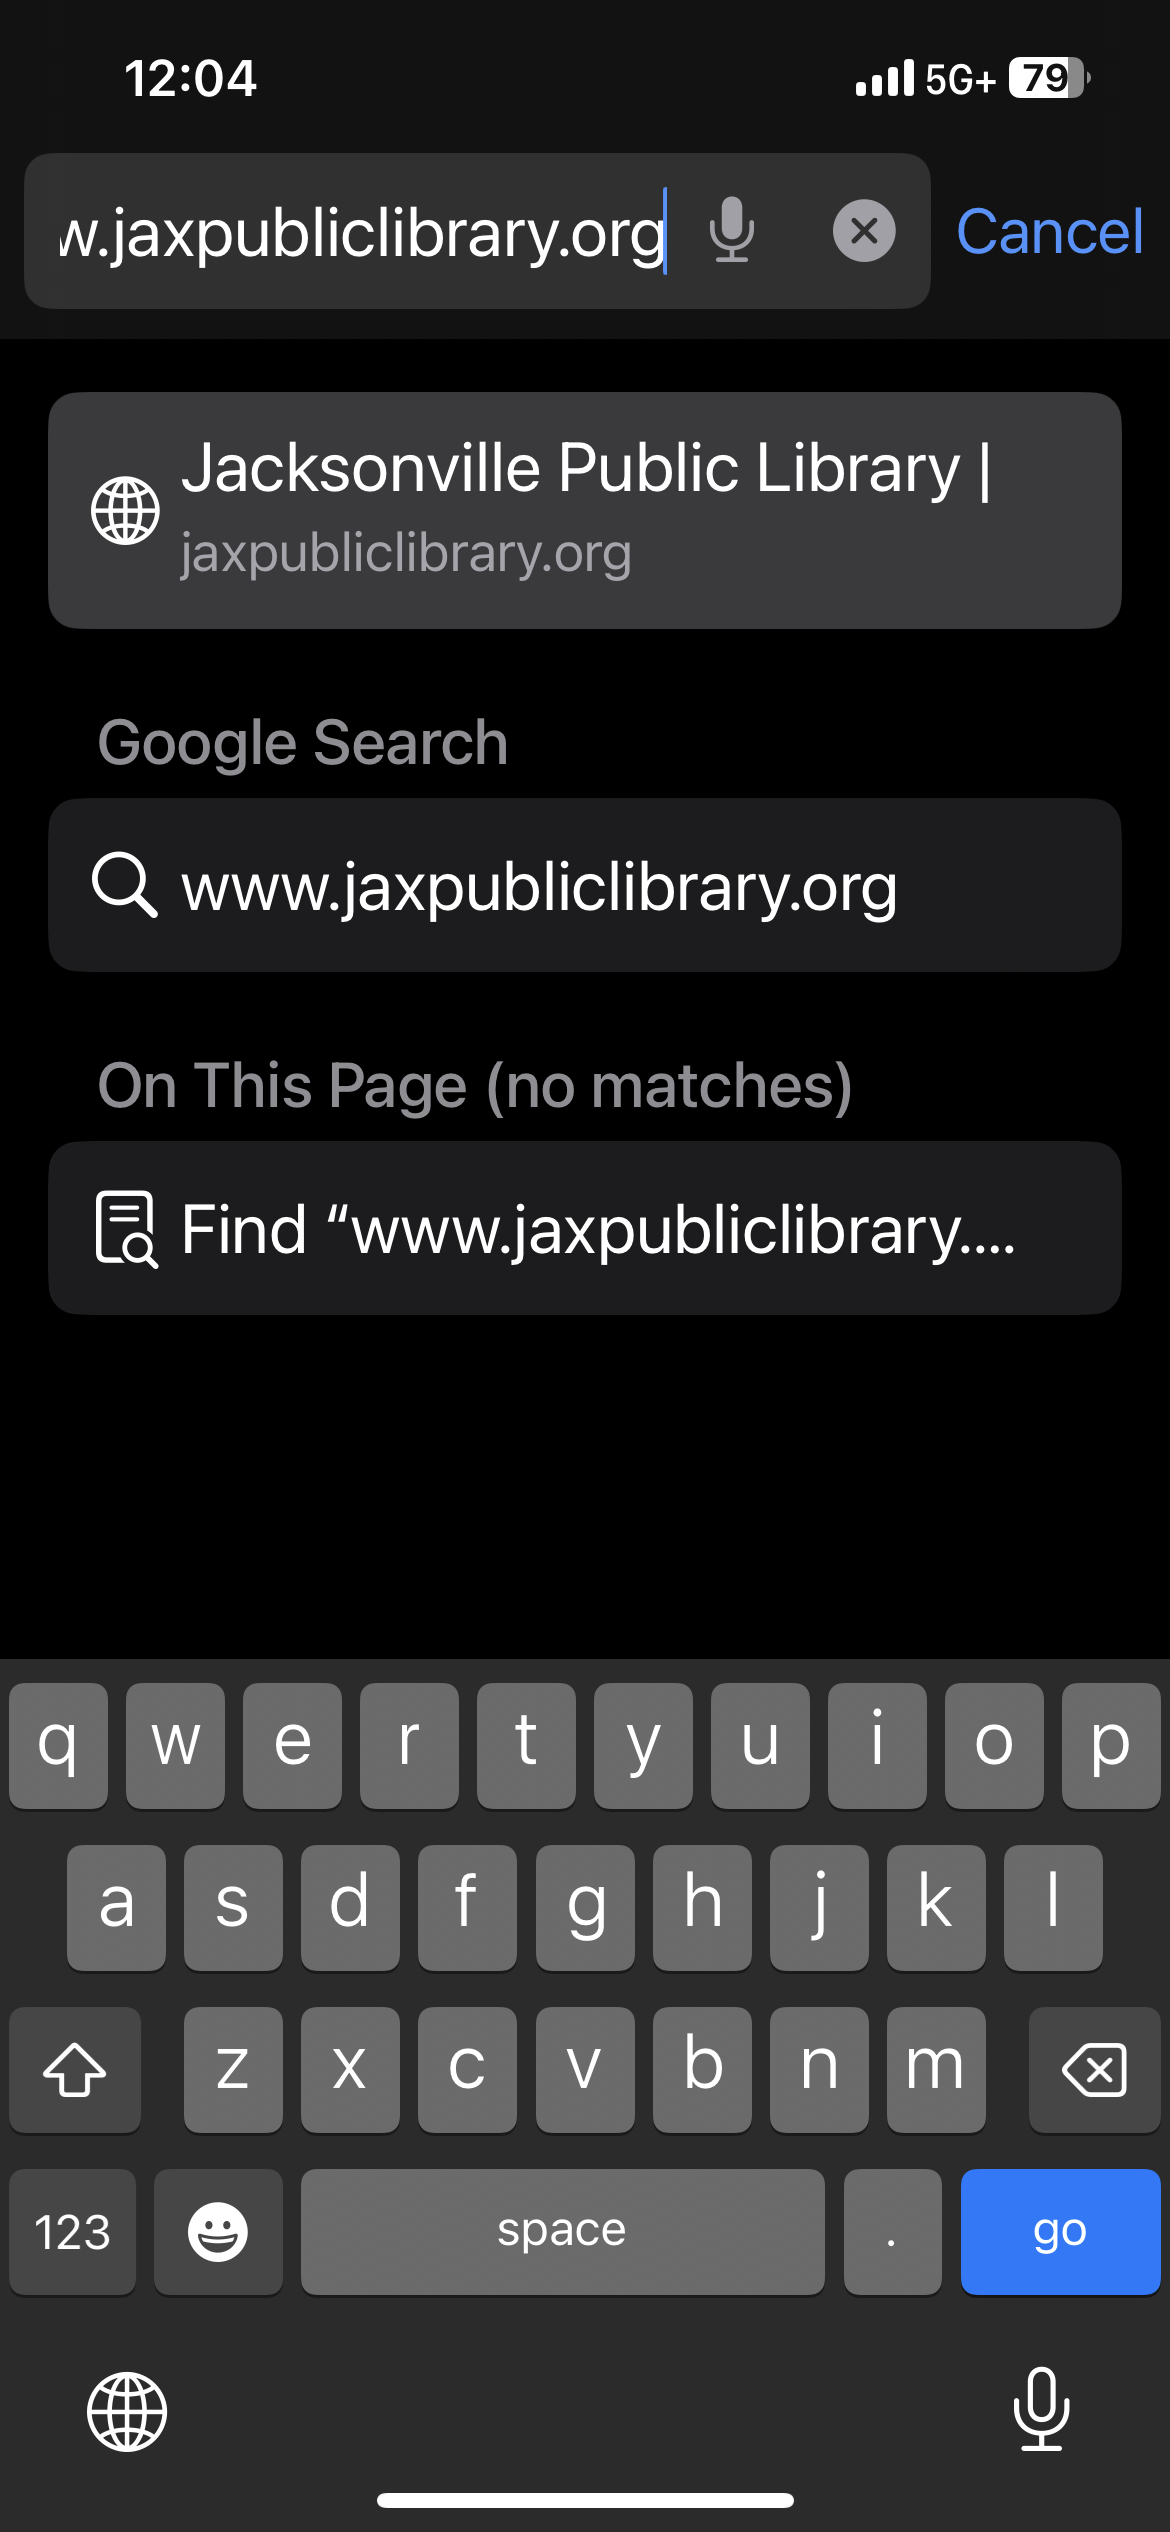 safari browser on iphone with www.jaxpubliclibrary.org in address bar